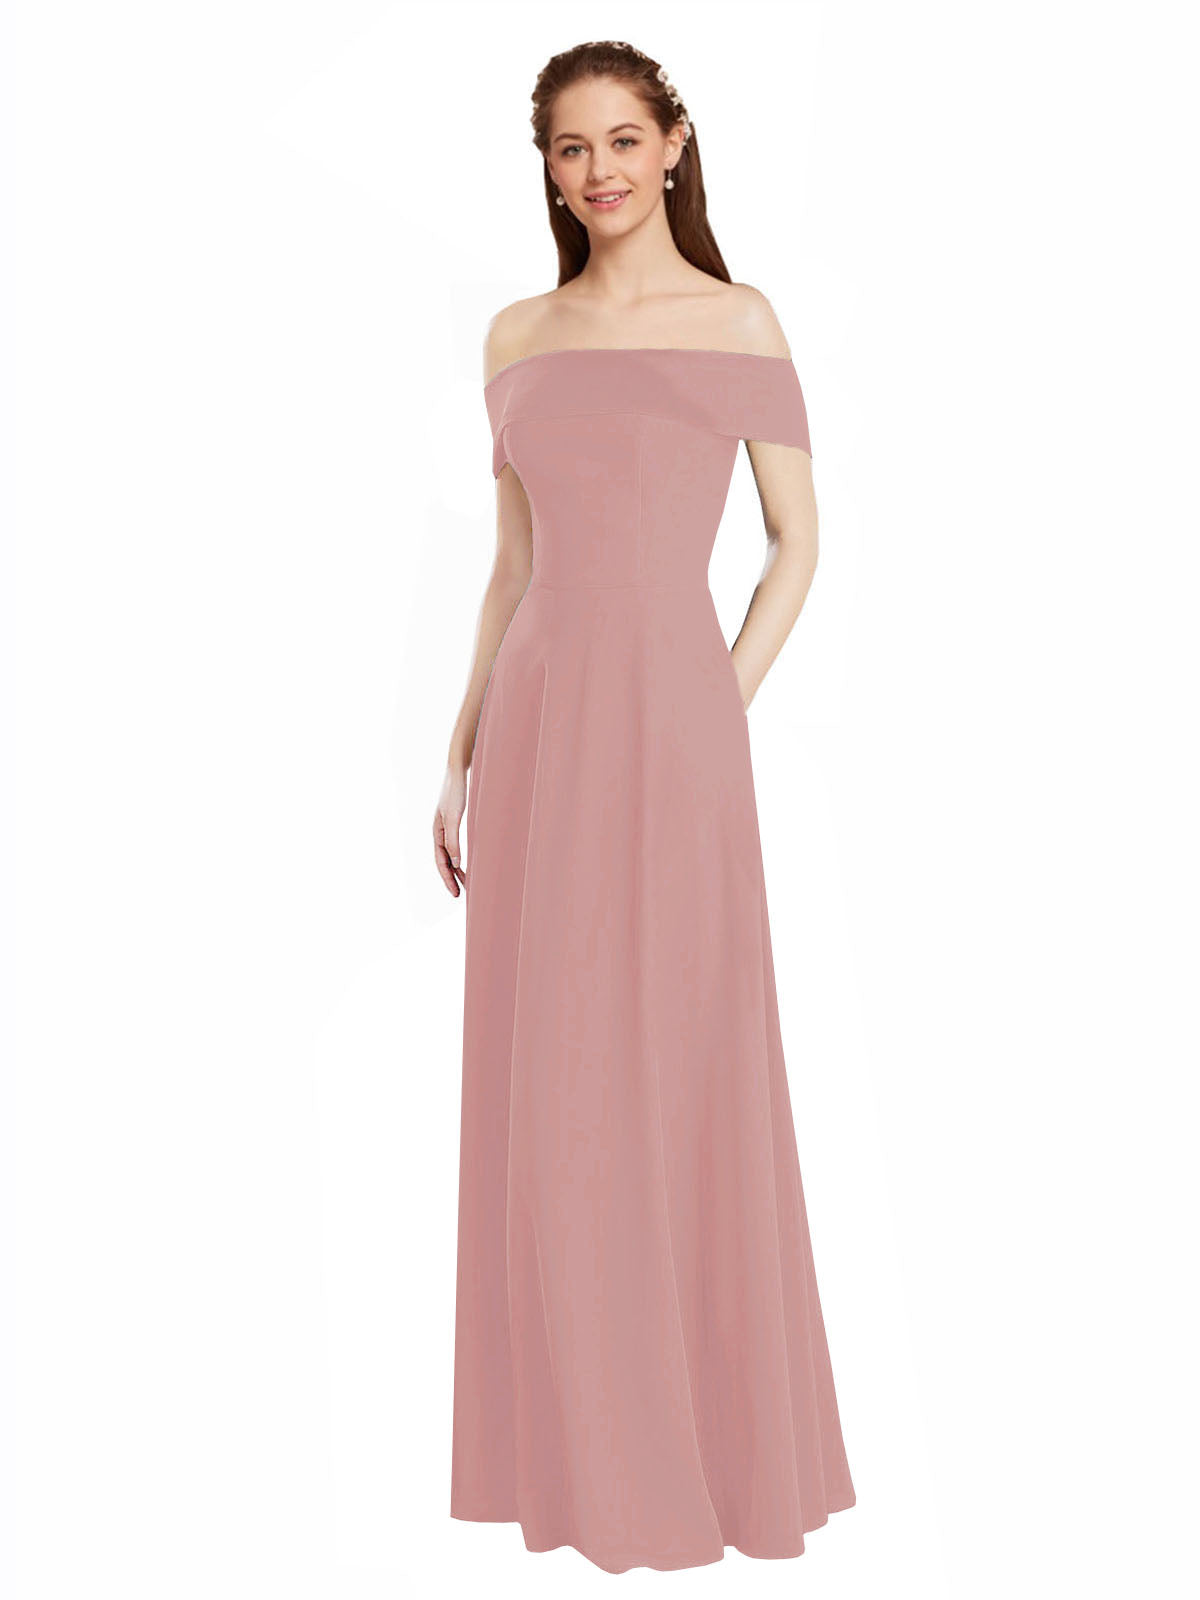 Dusty Pink A-Line Off the Shoulder Cap Sleeves Long Bridesmaid Dress Lina